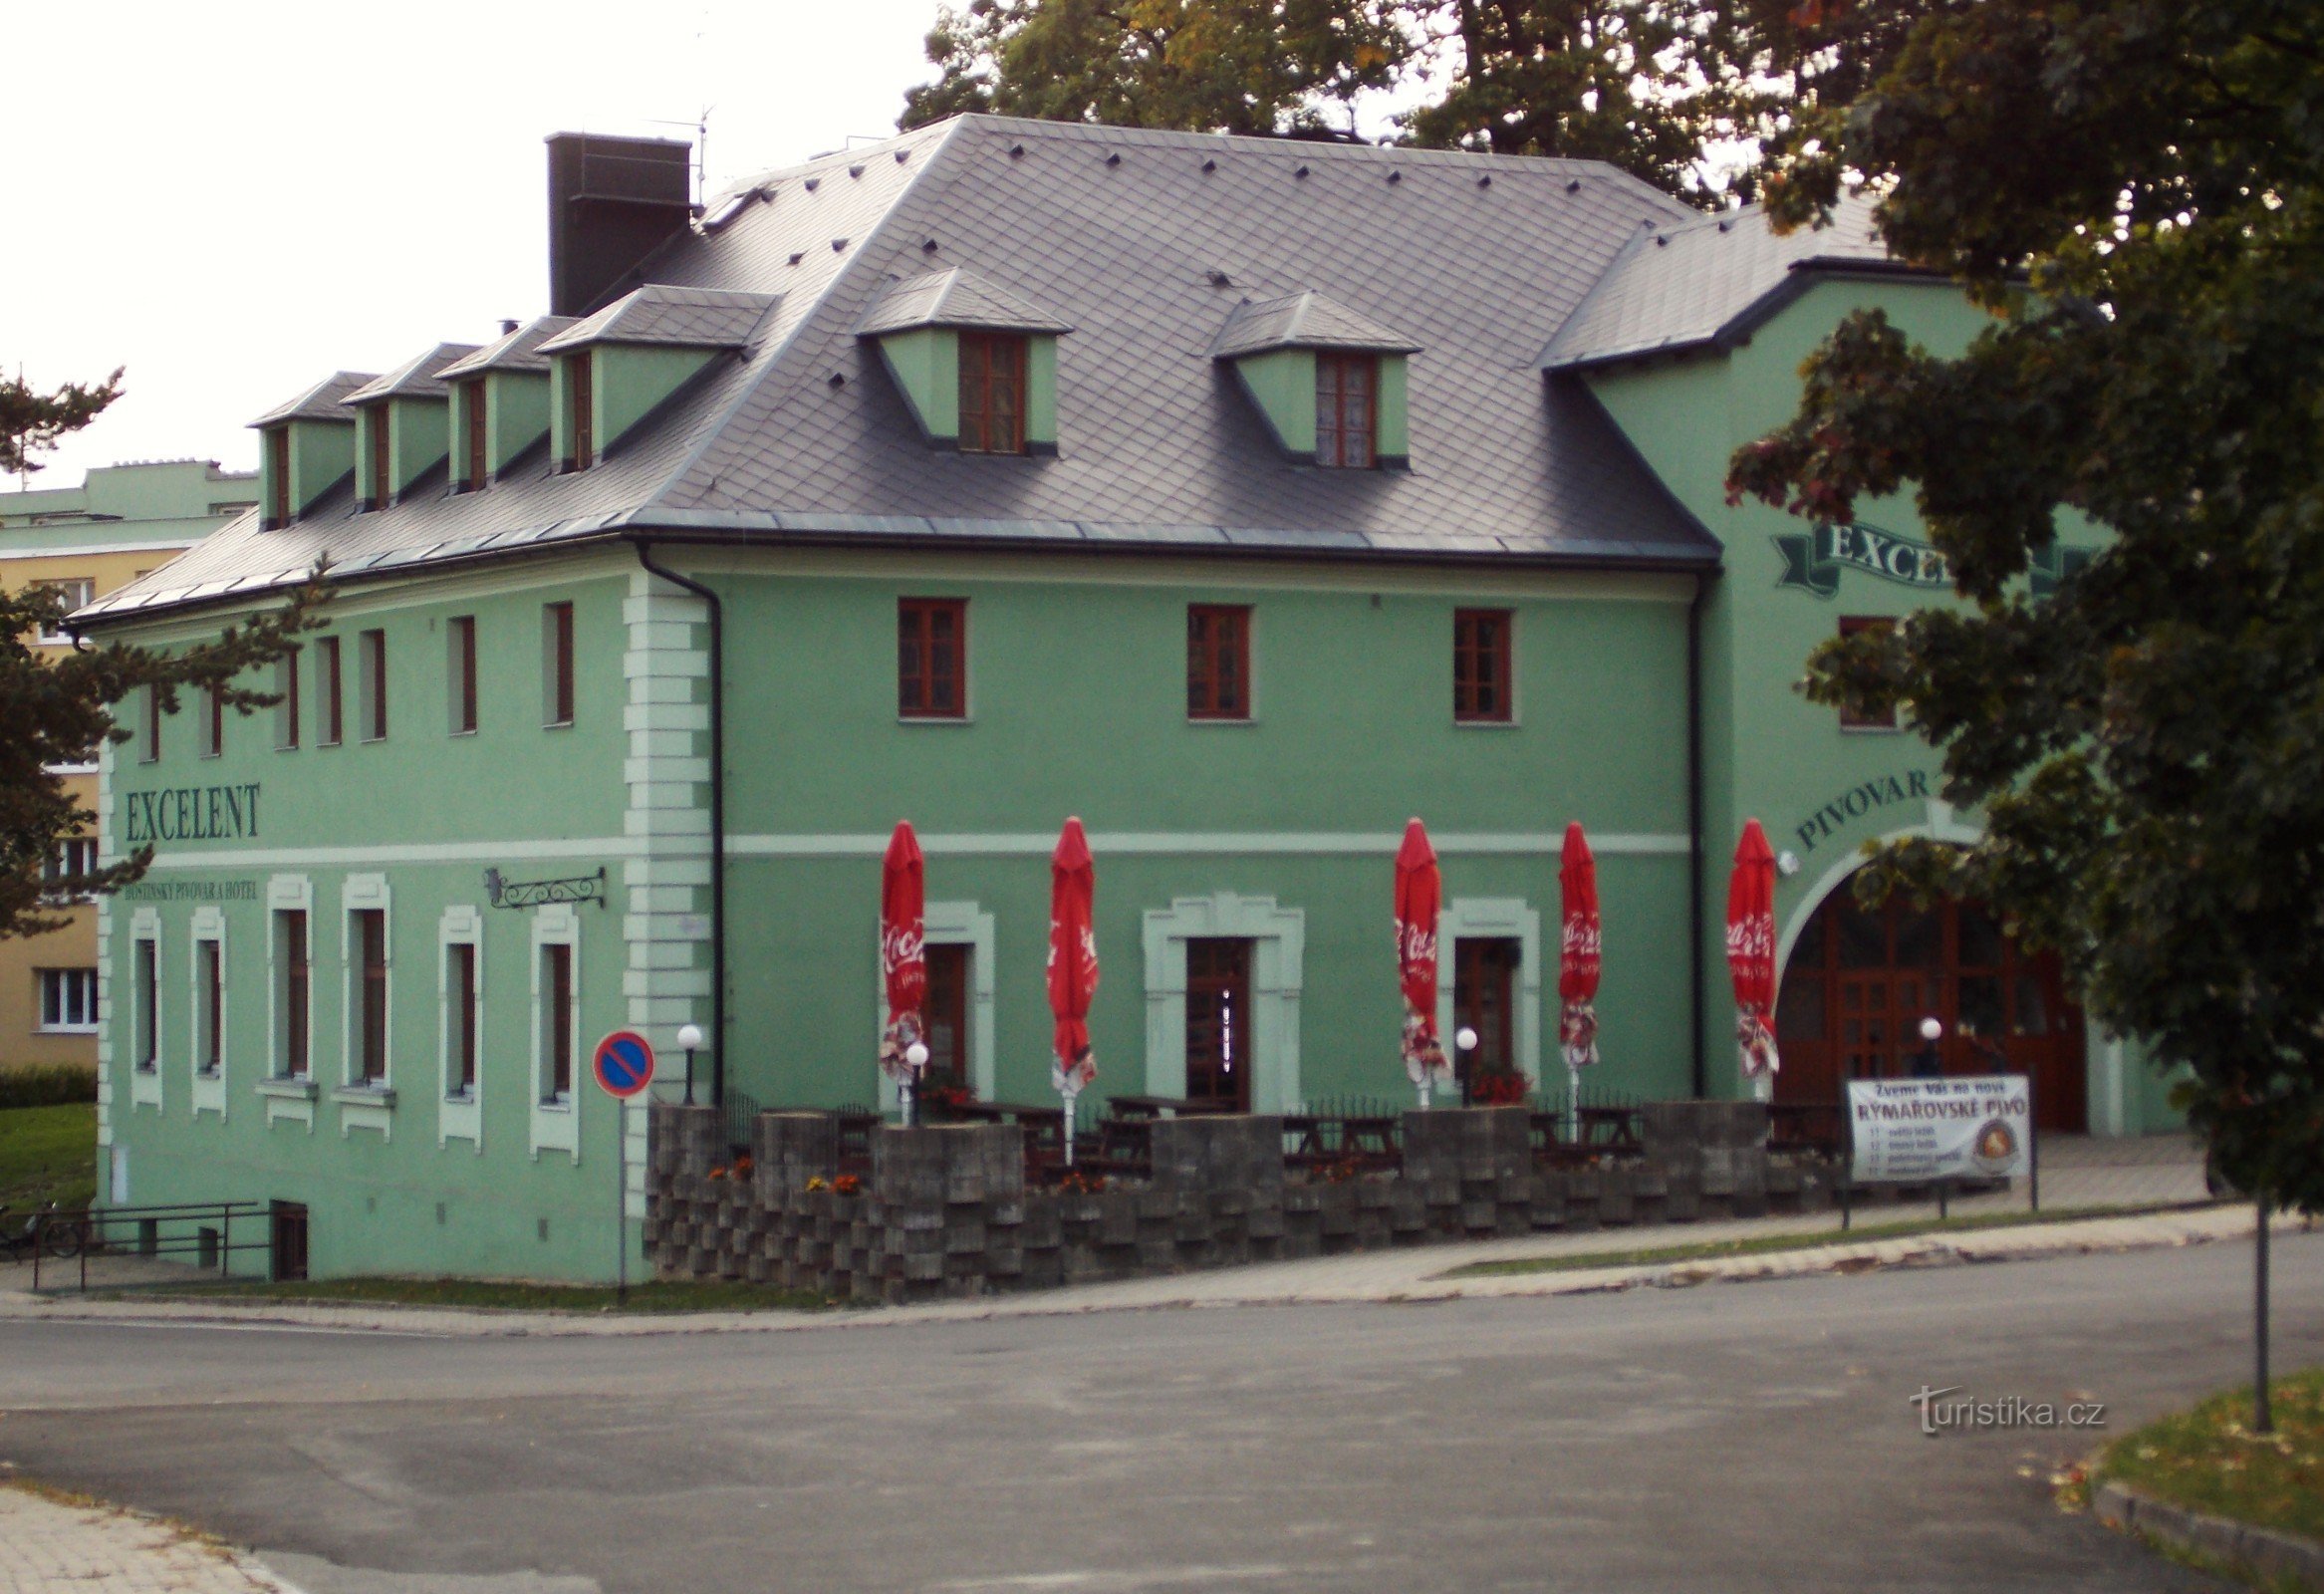 Inn Brewery and Hotel Exscelent in Rýmařov